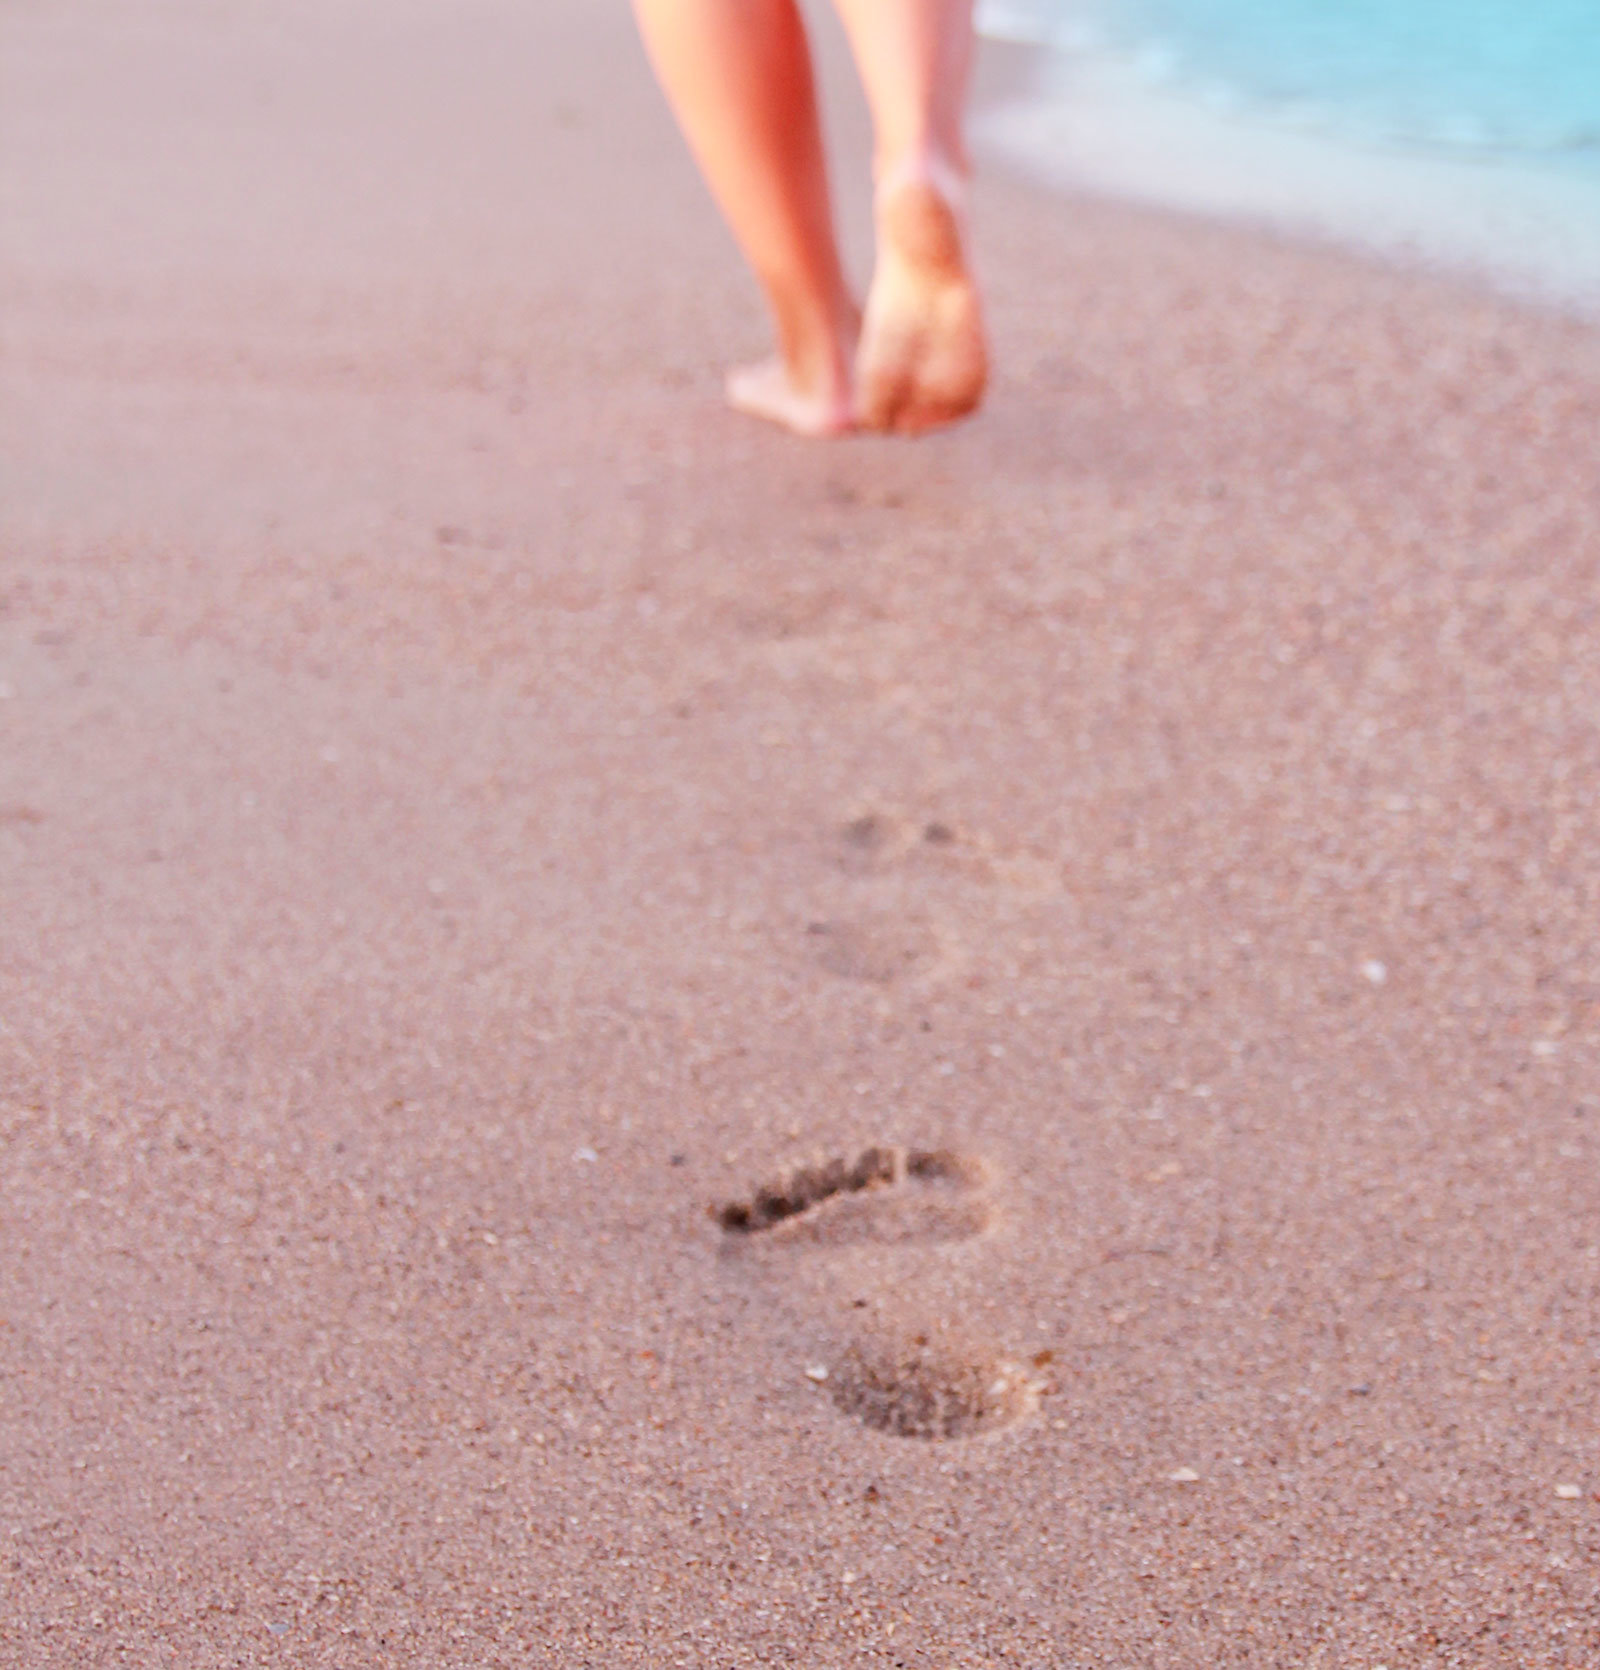 A runner at the beach and her bare foot-prints.